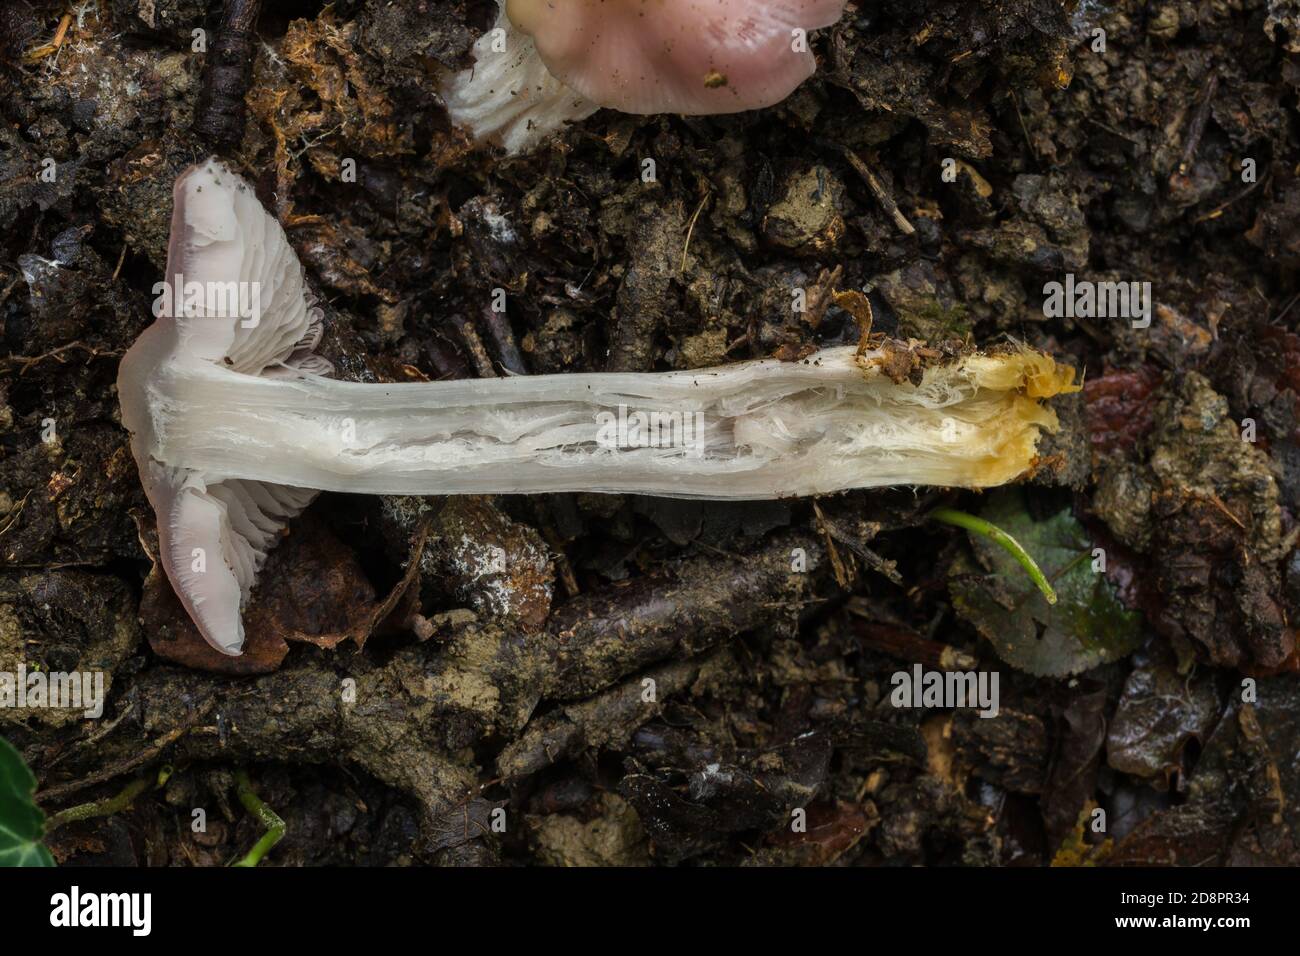 The interior stem of what is possibly a young 'sickner' or Russula emetica mushroom. Stock Photo